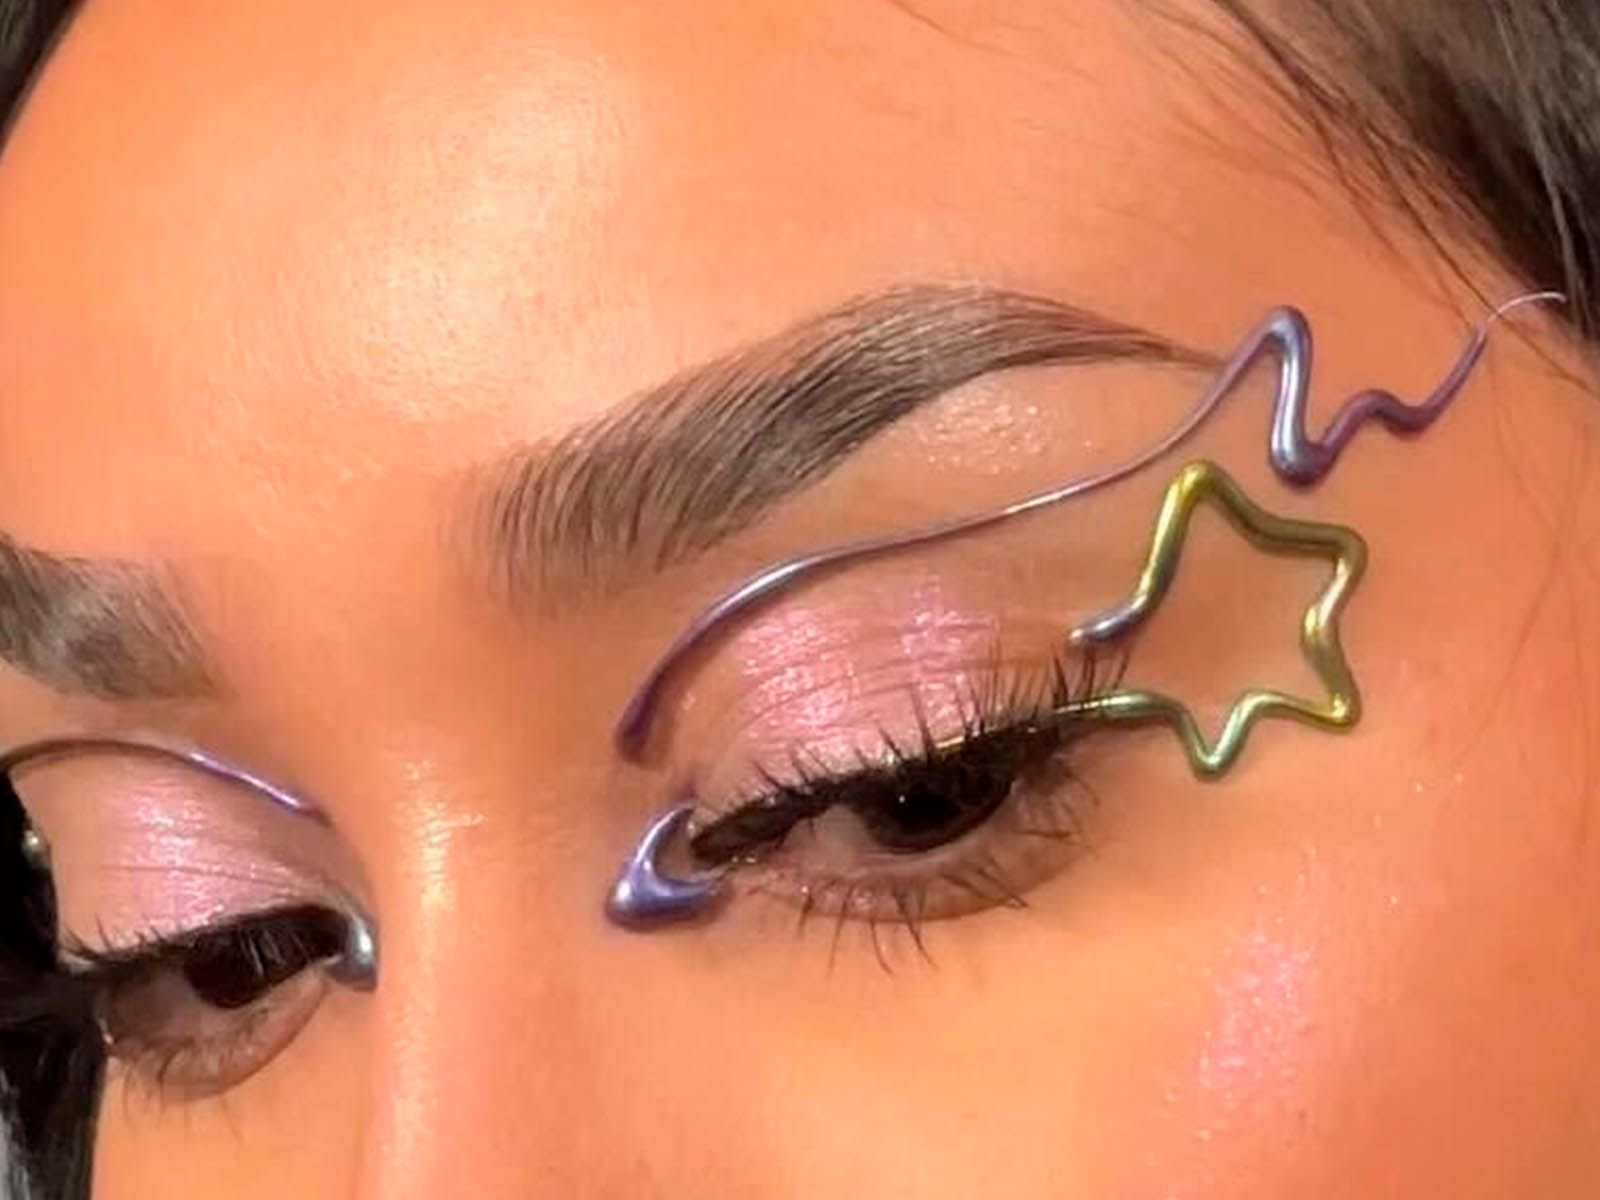 People on TikTok Are Using Hot Glue Guns to Create Graphic Makeup